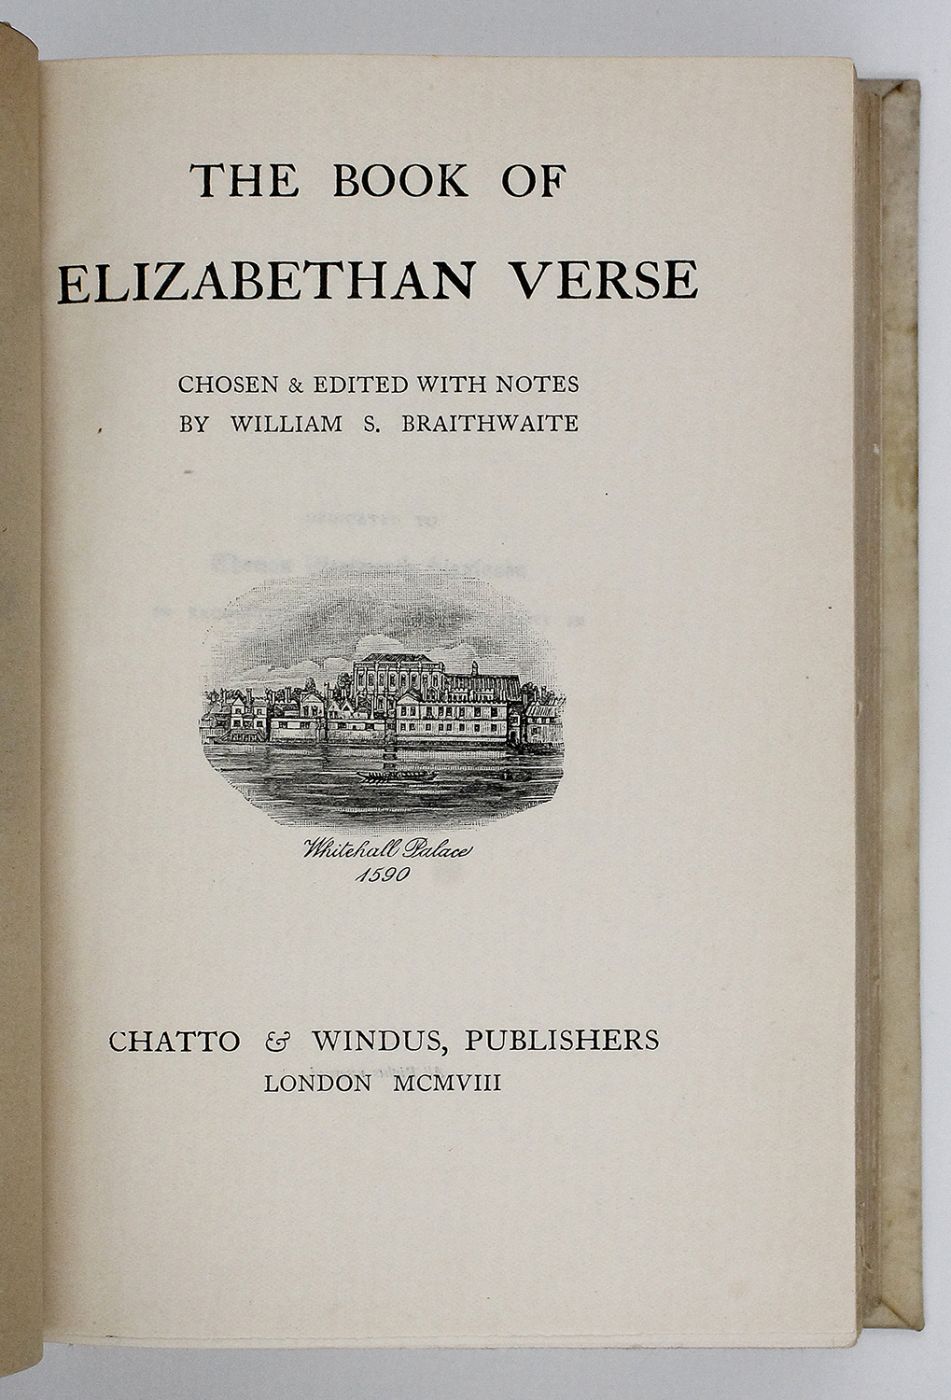 THE BOOK OF ELIZABETHAN VERSE -  image 2